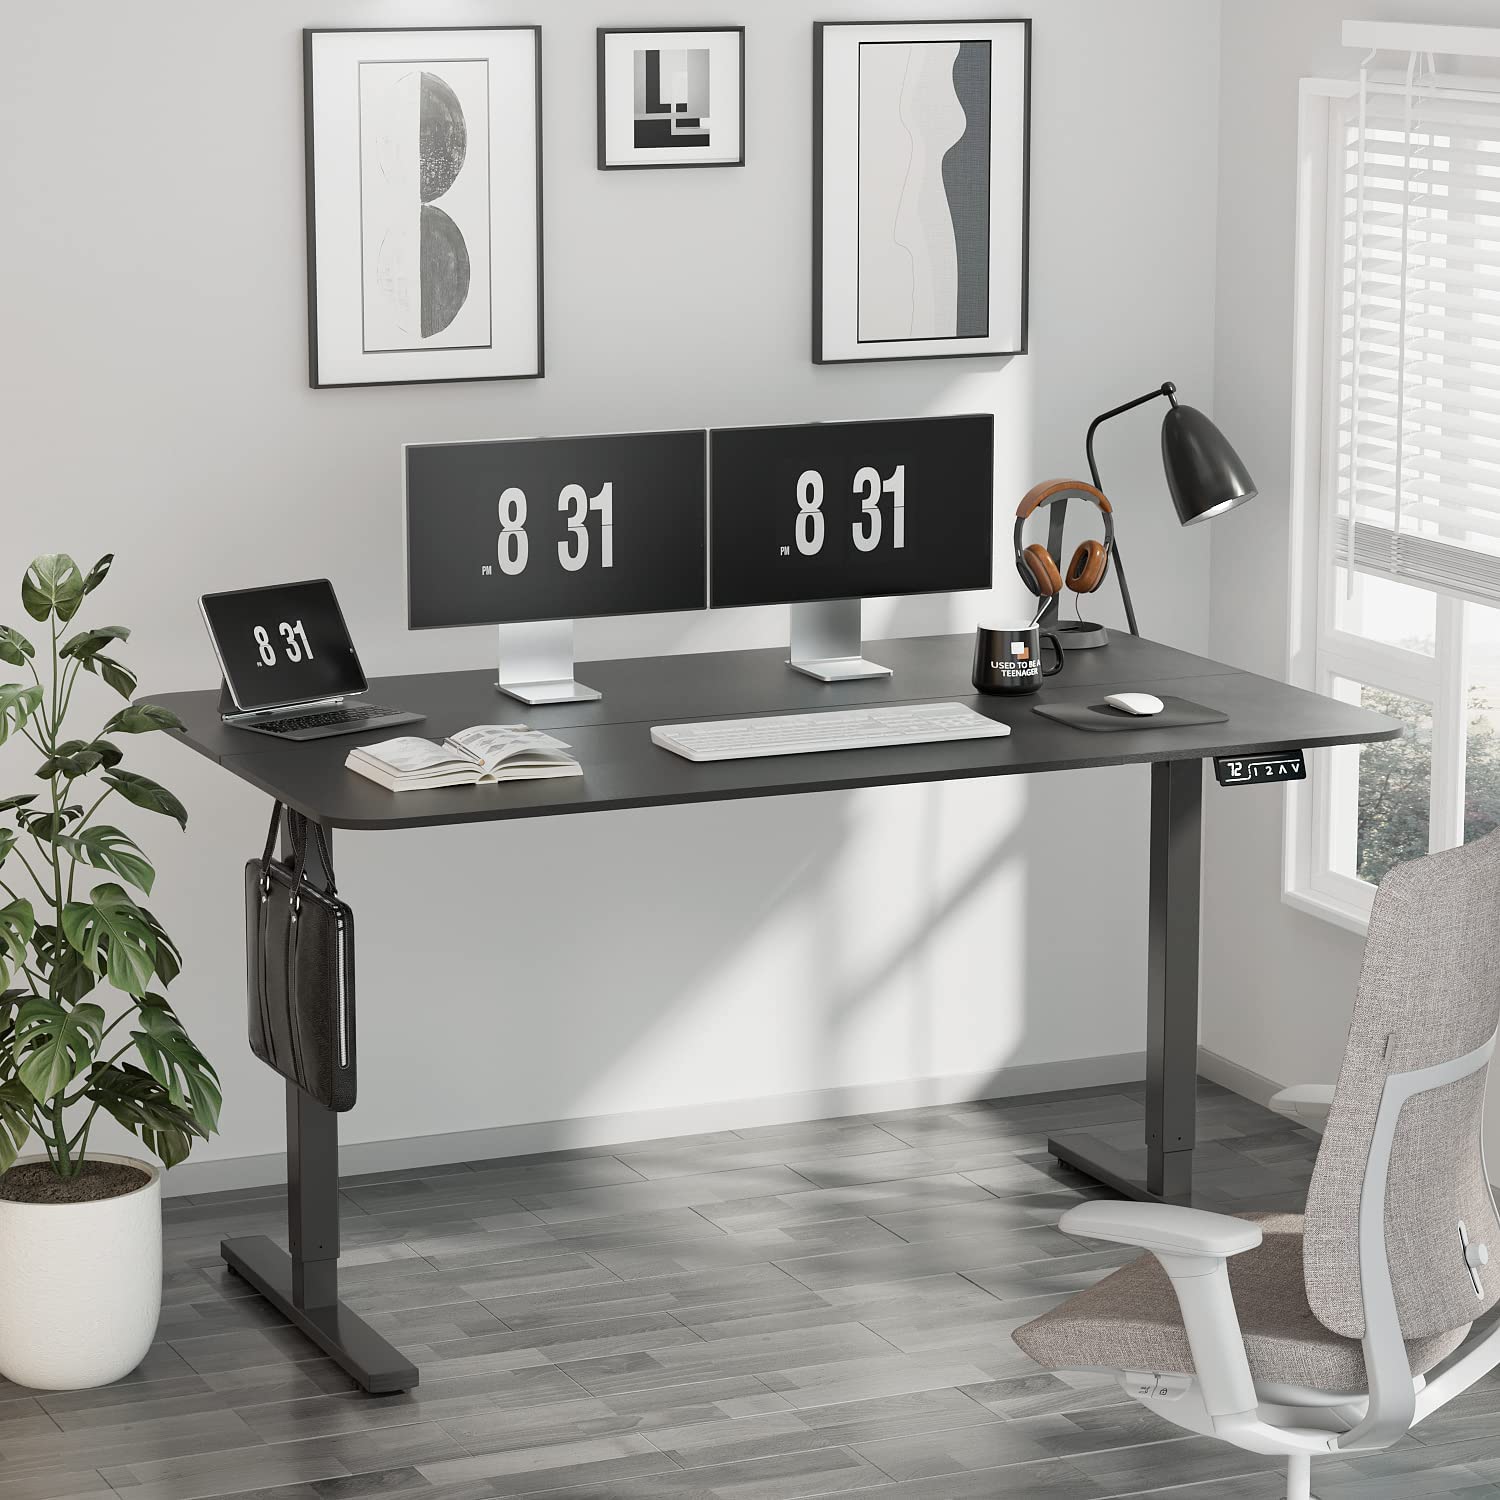 55-inch Stand-Up Desk